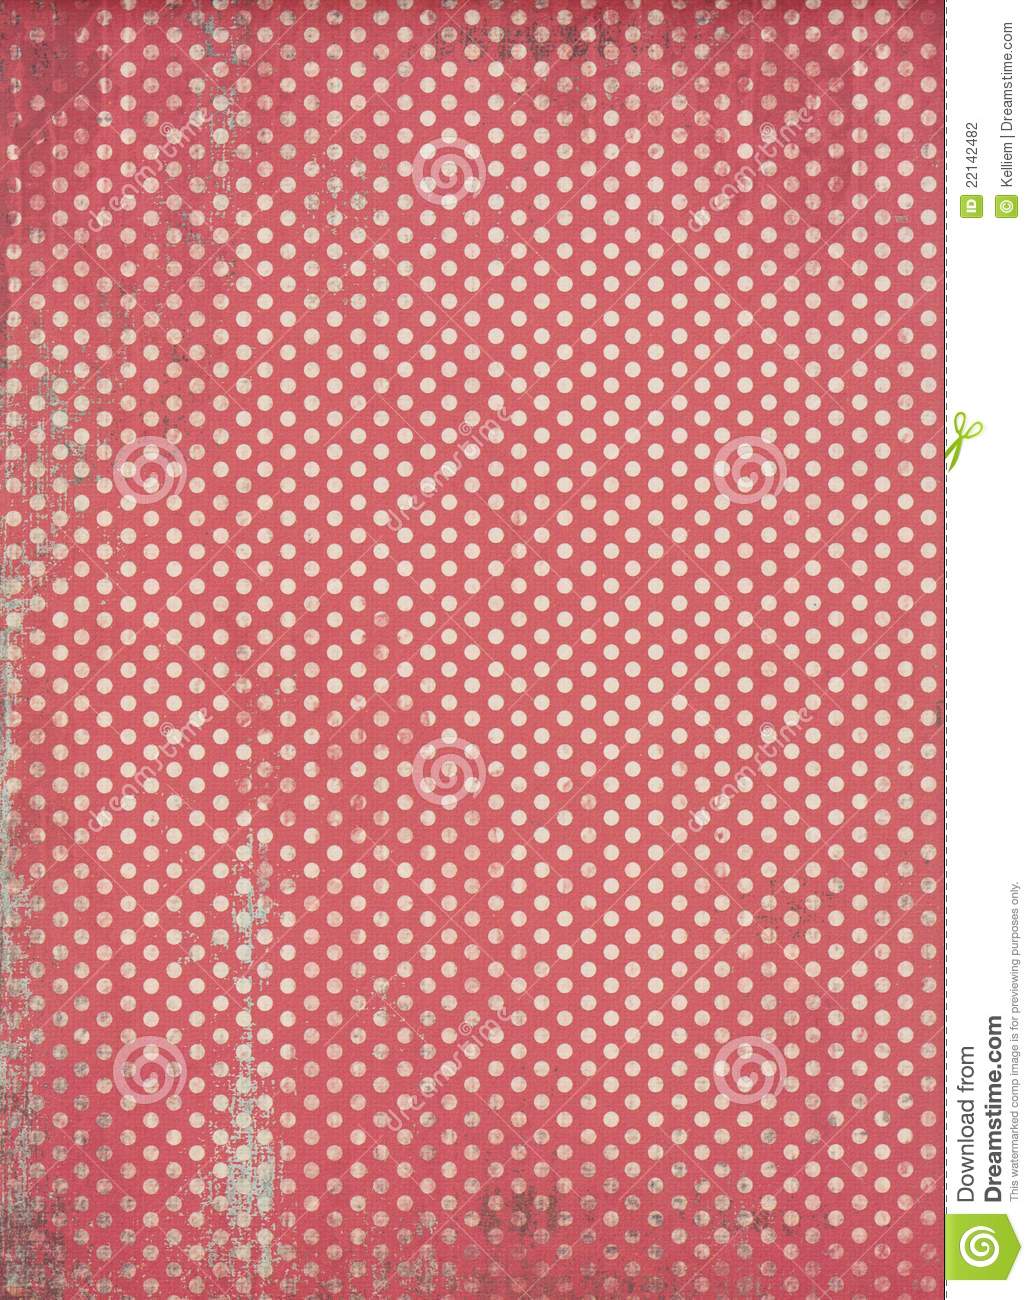 Red Polka Dot Background Stock Photography   Image  22142482